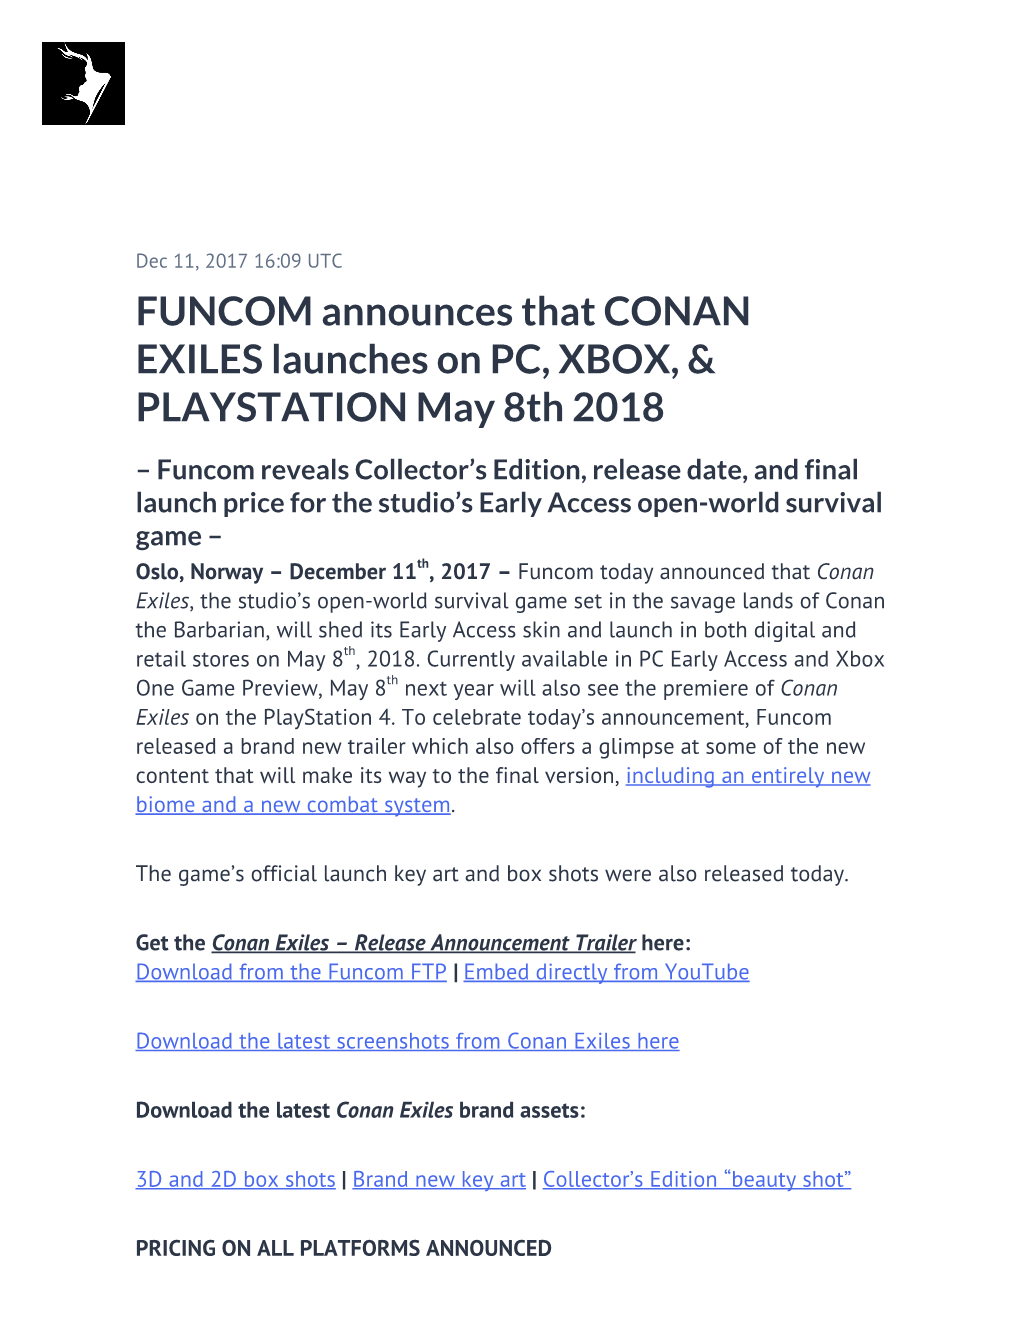 FUNCOM Announces That CONAN EXILES Launches on PC, XBOX, & PLAYSTATION May 8Th 2018